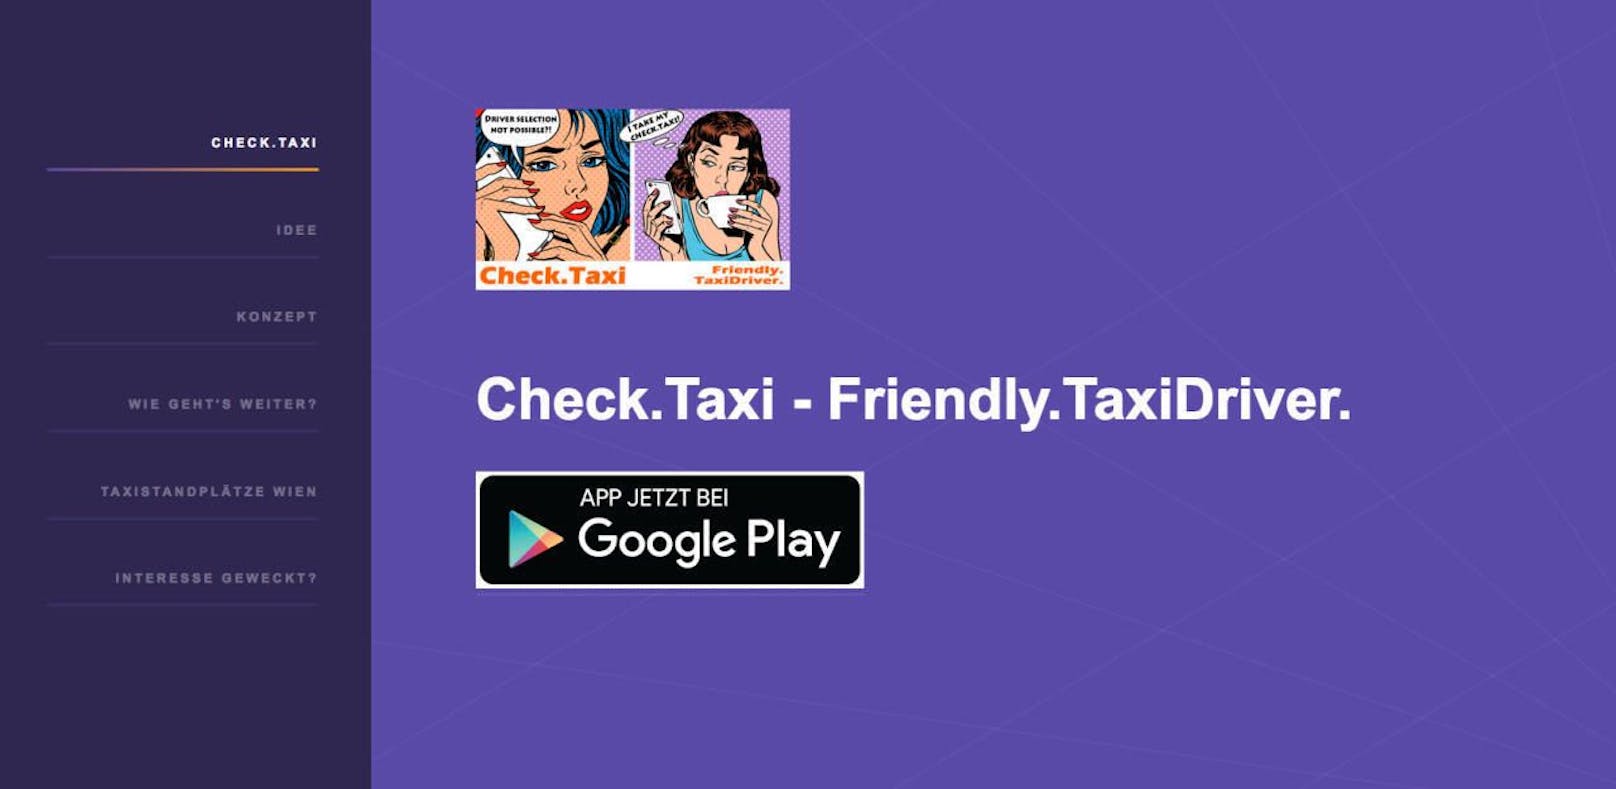 www.check.taxi